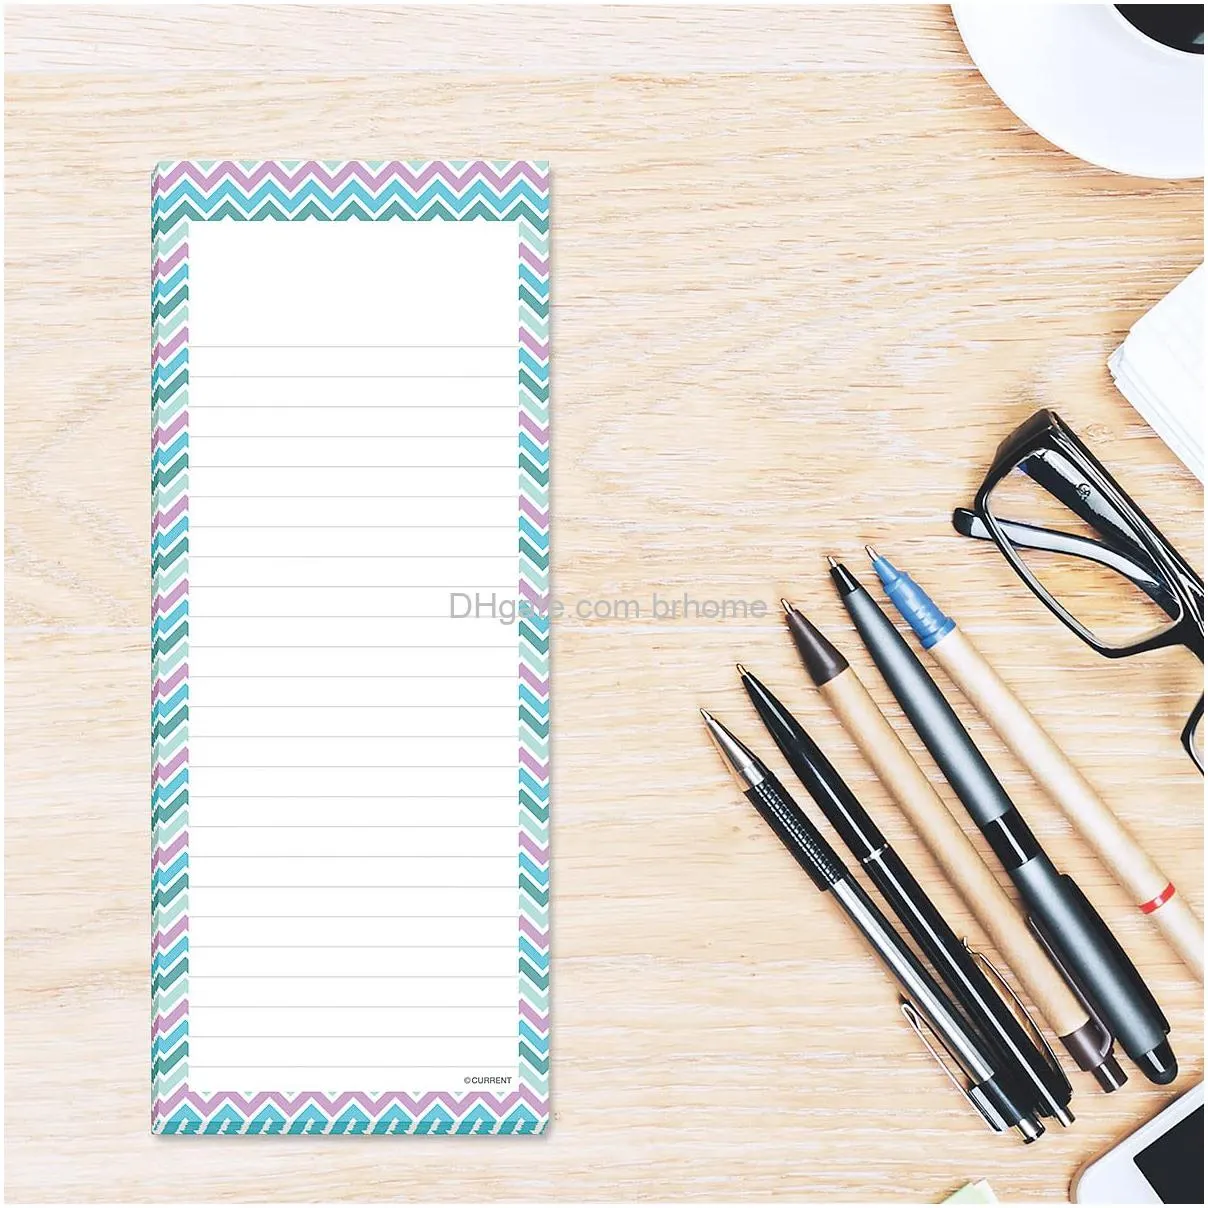 cool patterns magnetic notepads set of 6 50sheet pads 3 1/4 x 8 inches lined memo pads shipping list office organizer